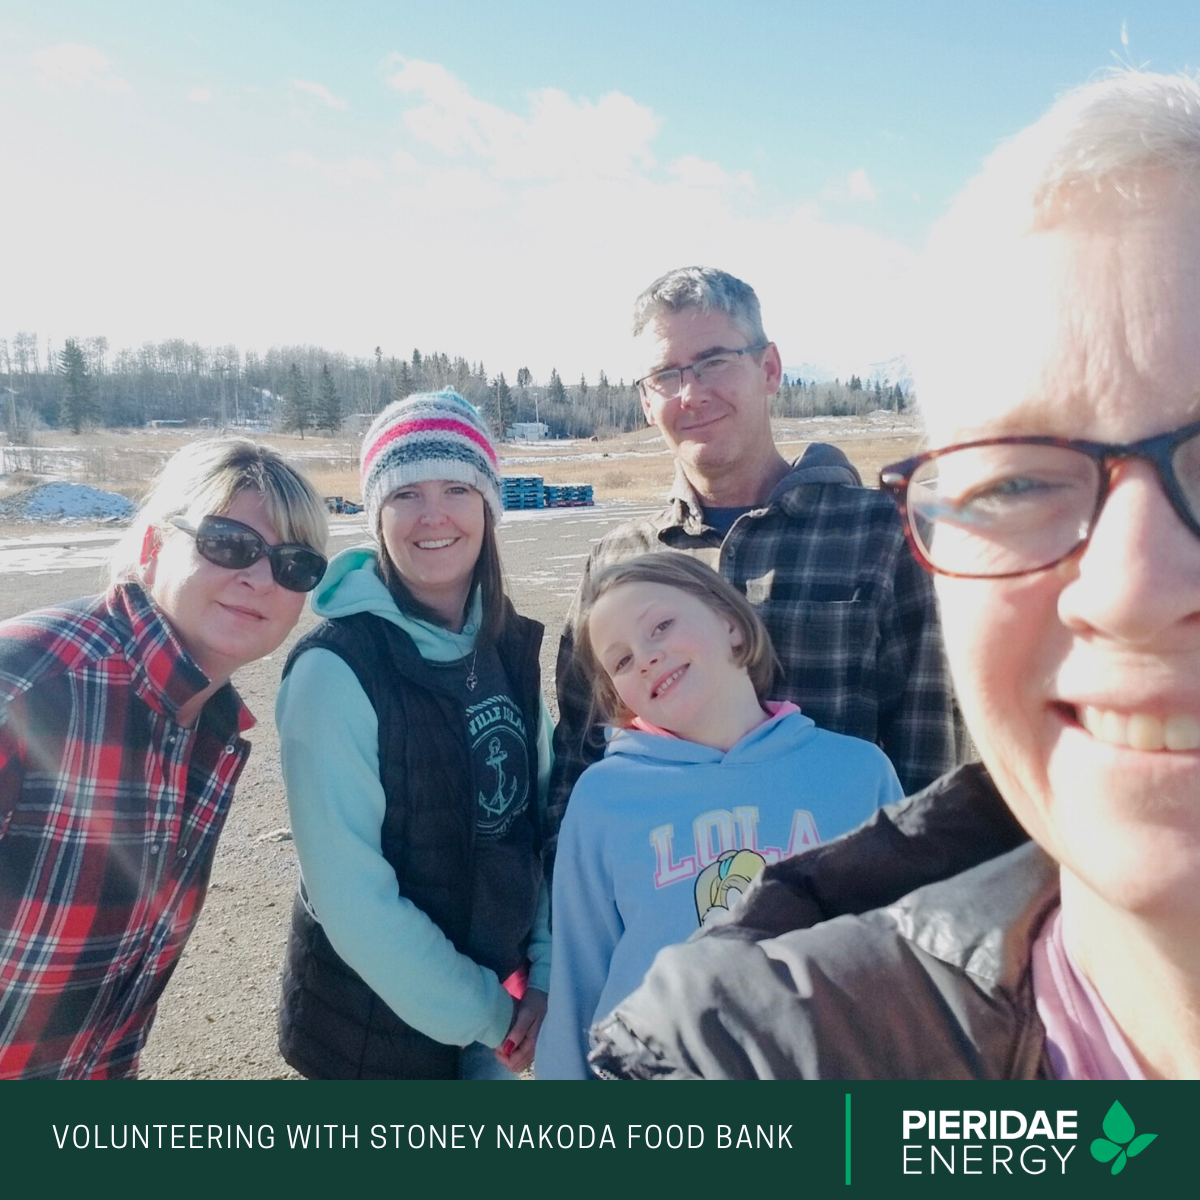 Our five Pieridae volunteers take a selfie together at the Stoney Nakoda Food Bank